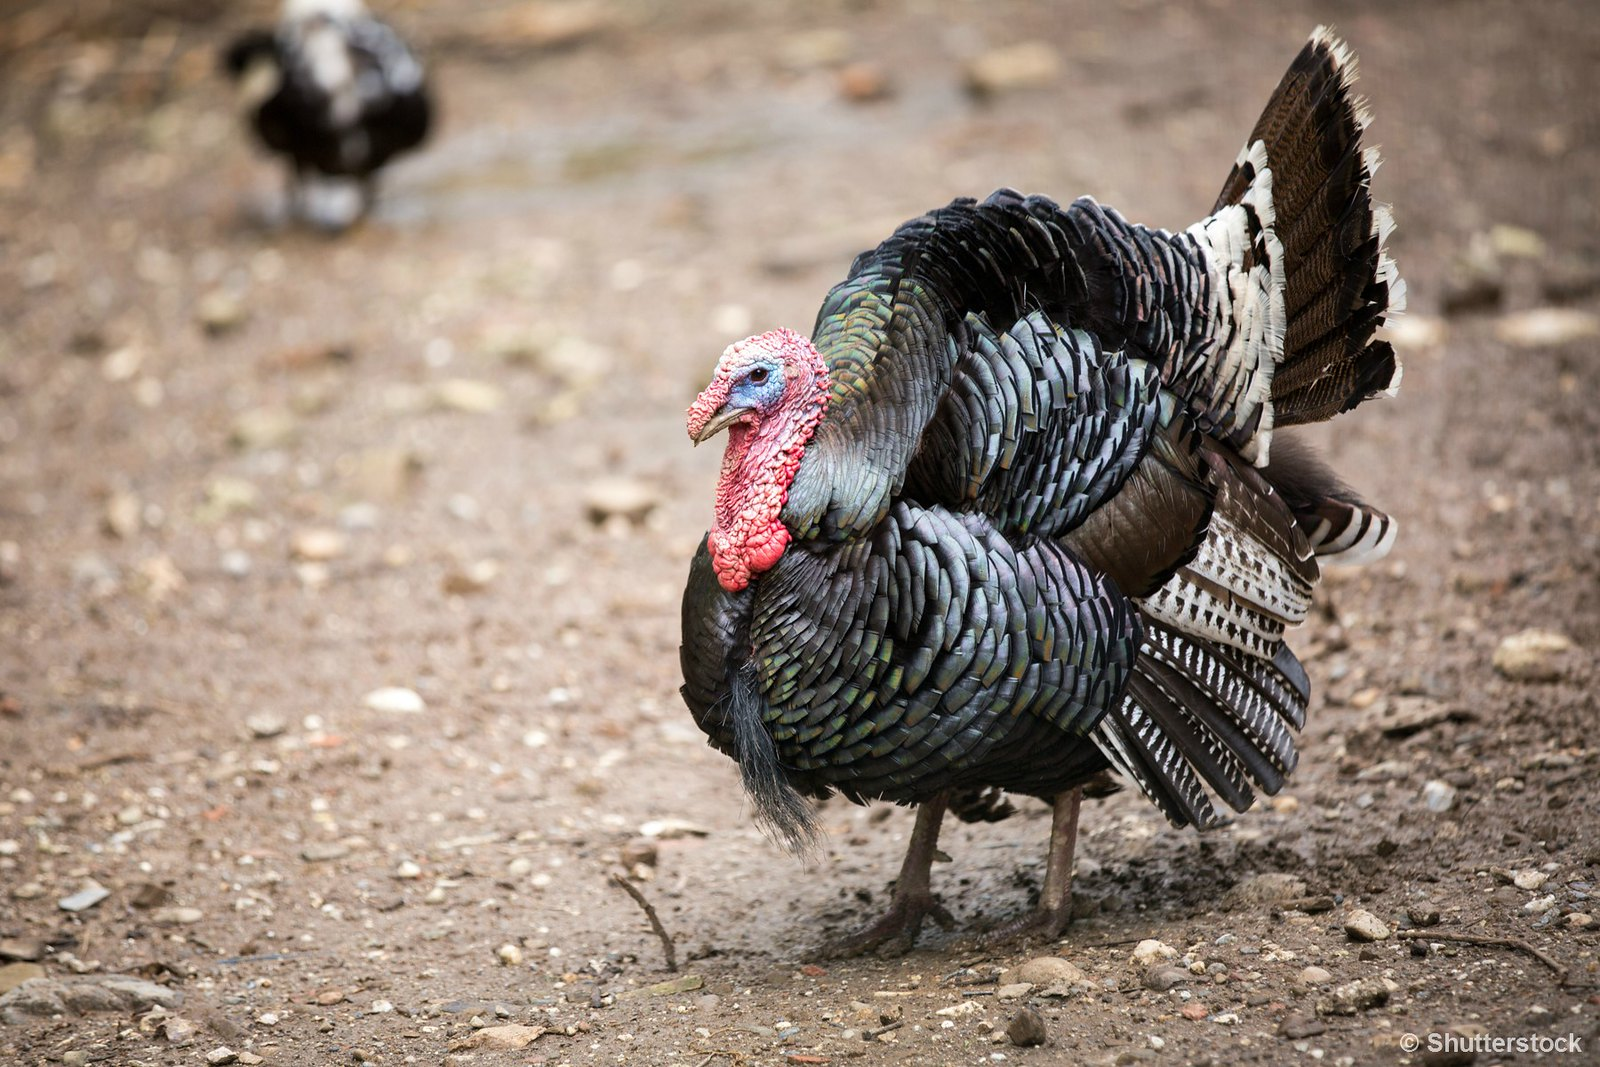 Find out what states harvest the most turkeys.